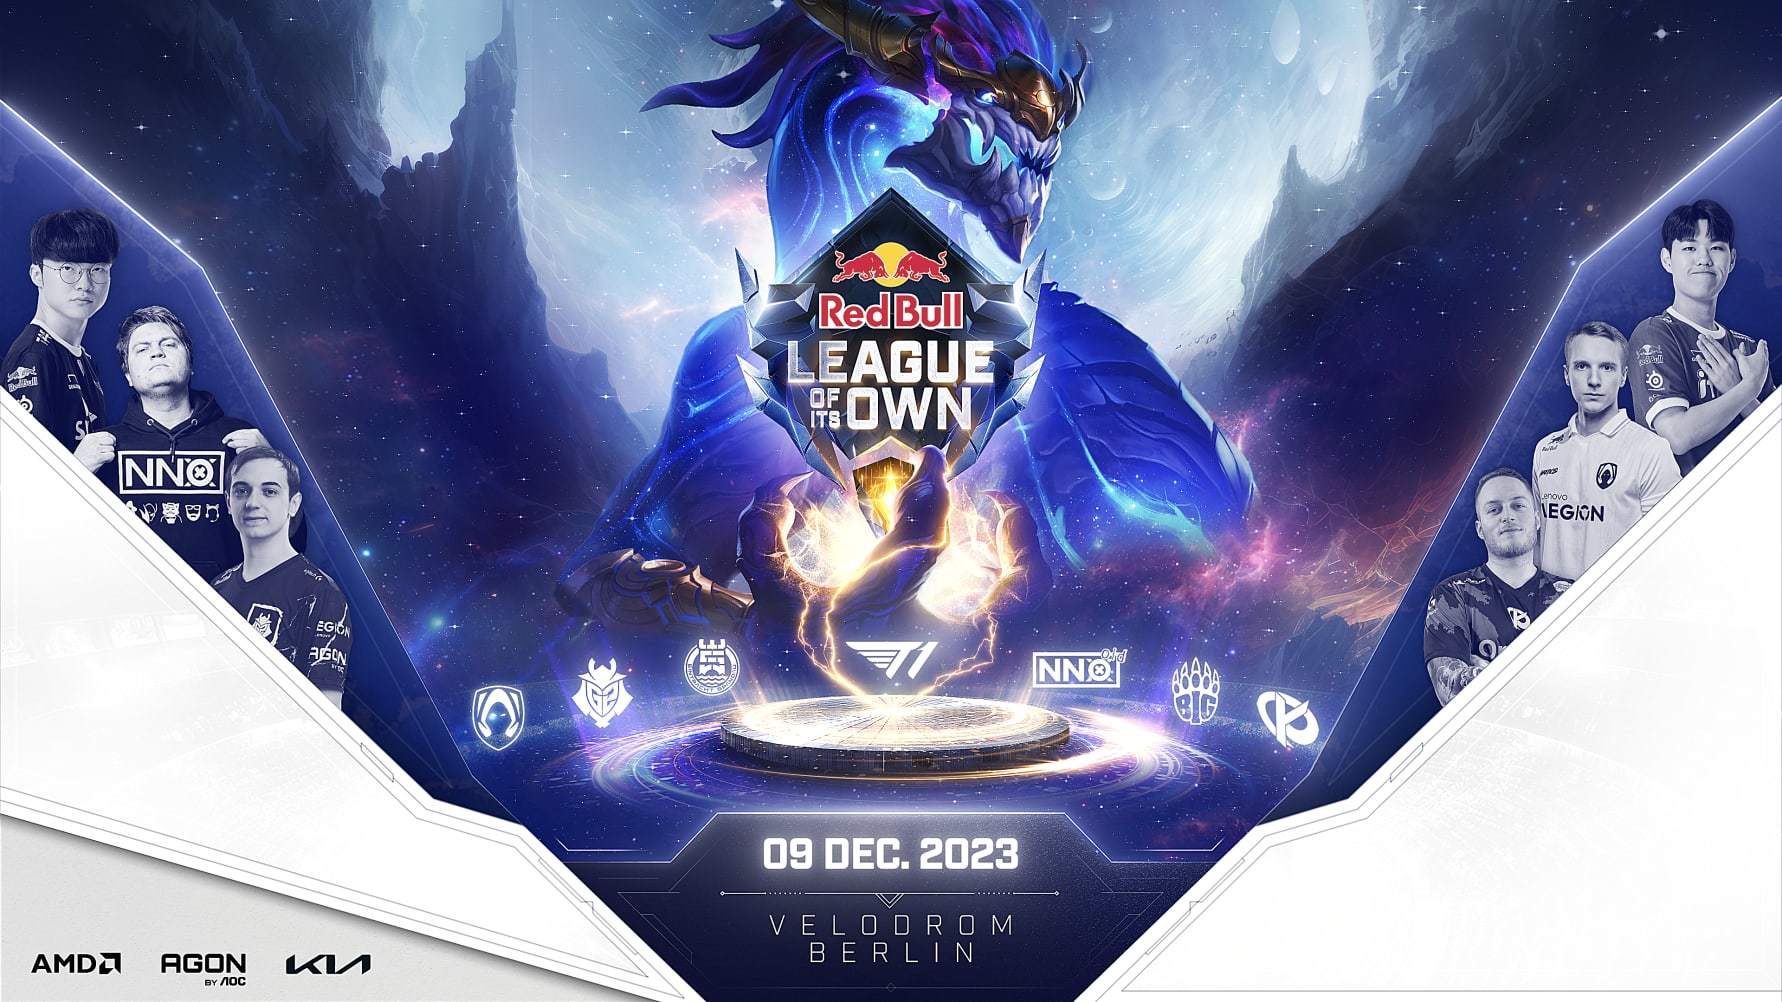 G2 Esports rounds out Red Bull League of its Own lineup - League of Legends